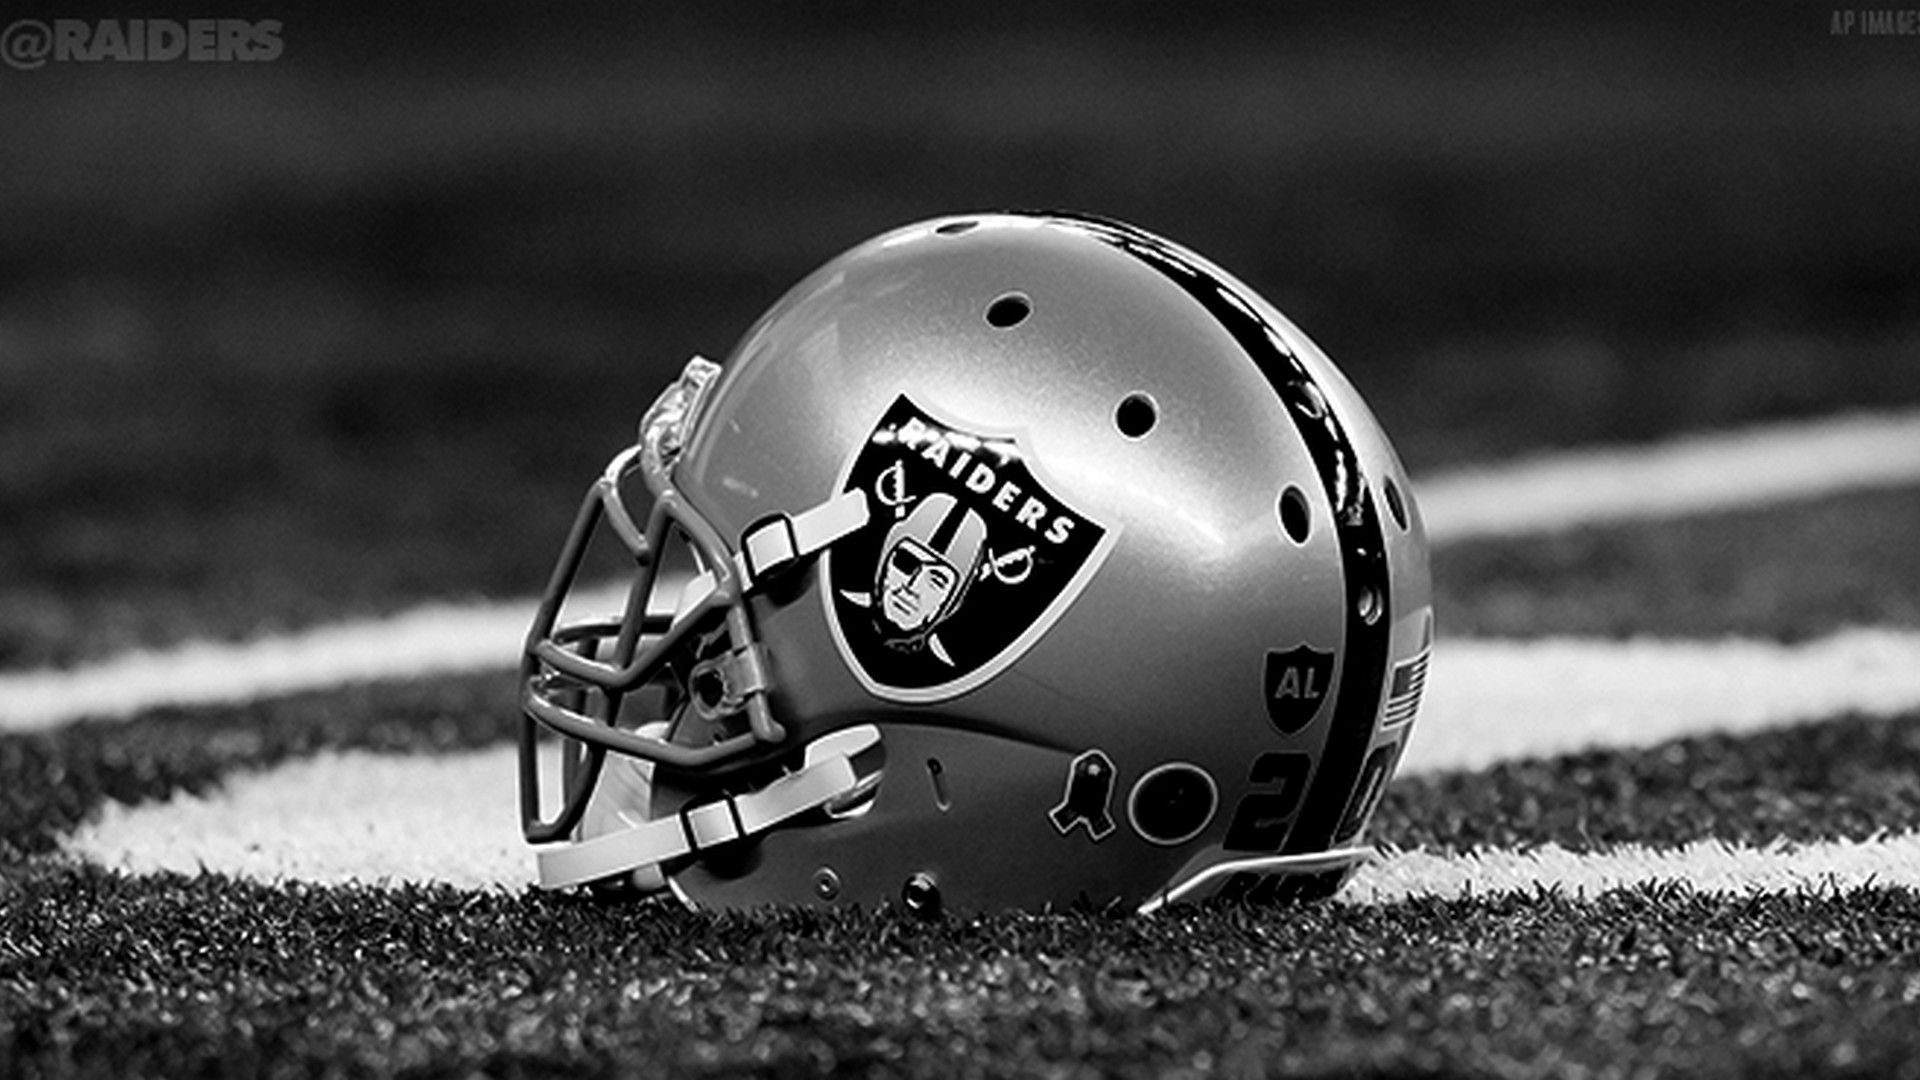 Oakland Raiders Wallpaper With High-resolution Pixel - Oakland Raiders Wallpaper 2019 - HD Wallpaper 